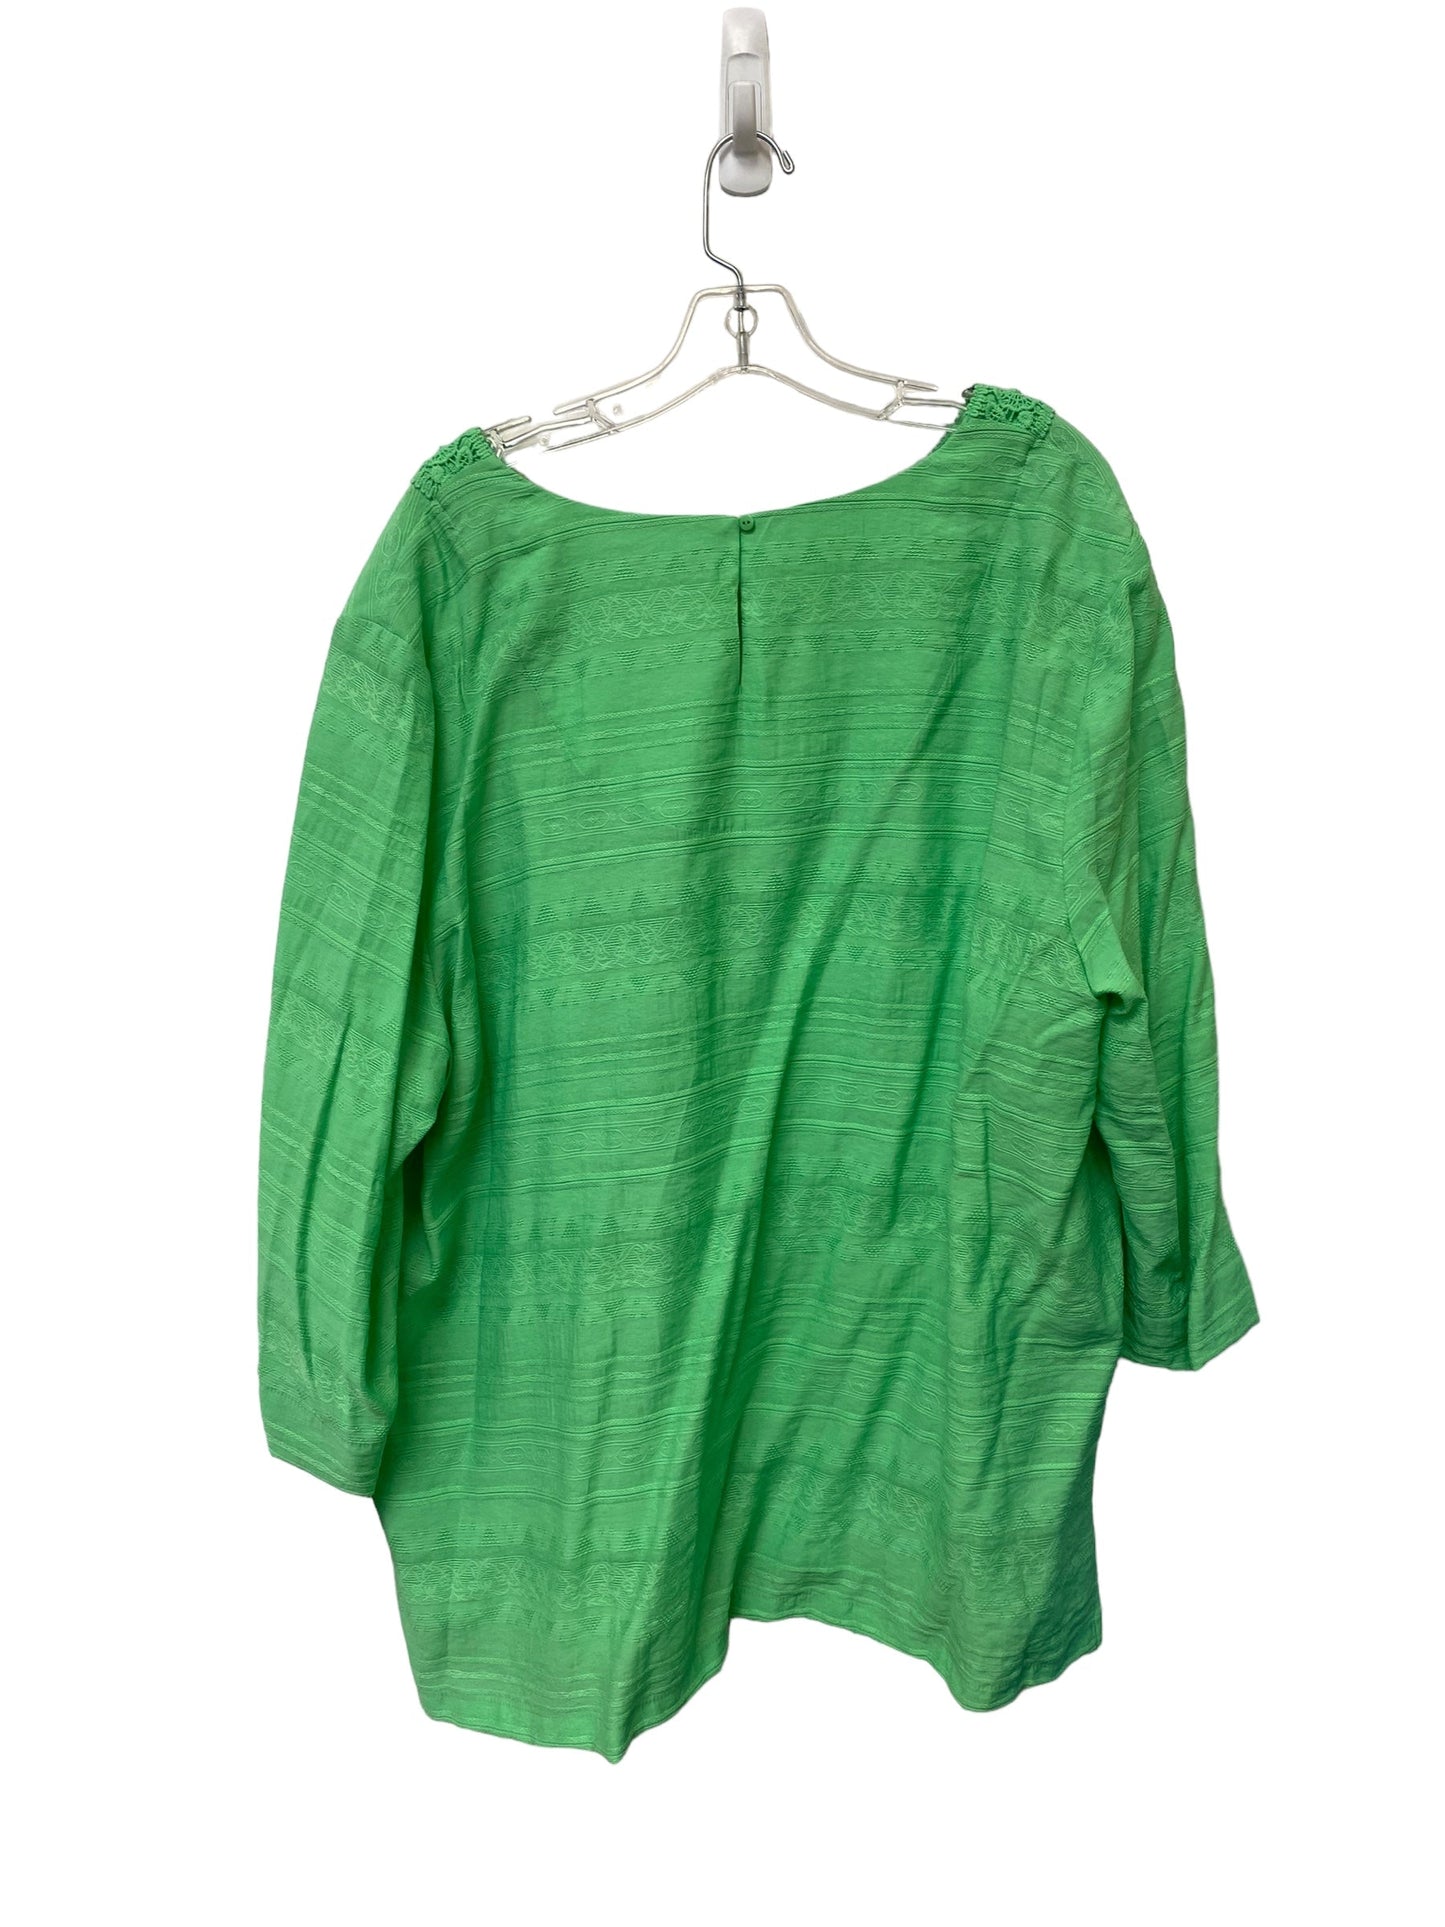 Green Top Long Sleeve Alfred Dunner, Size 2x